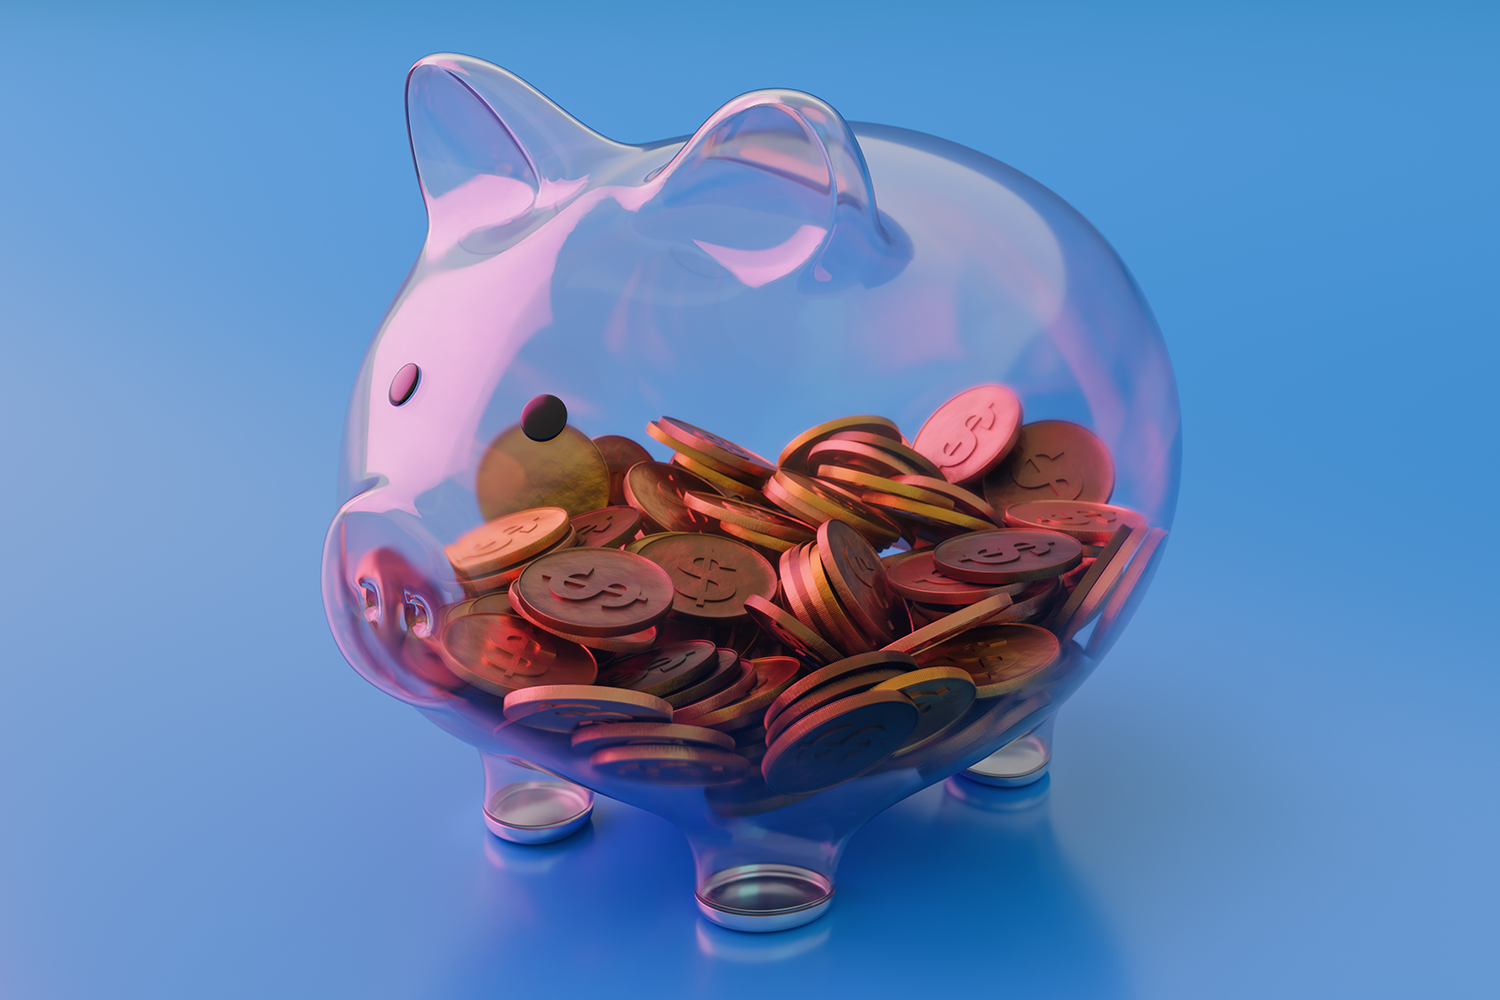 A photo of a clear piggy bank with coins inside